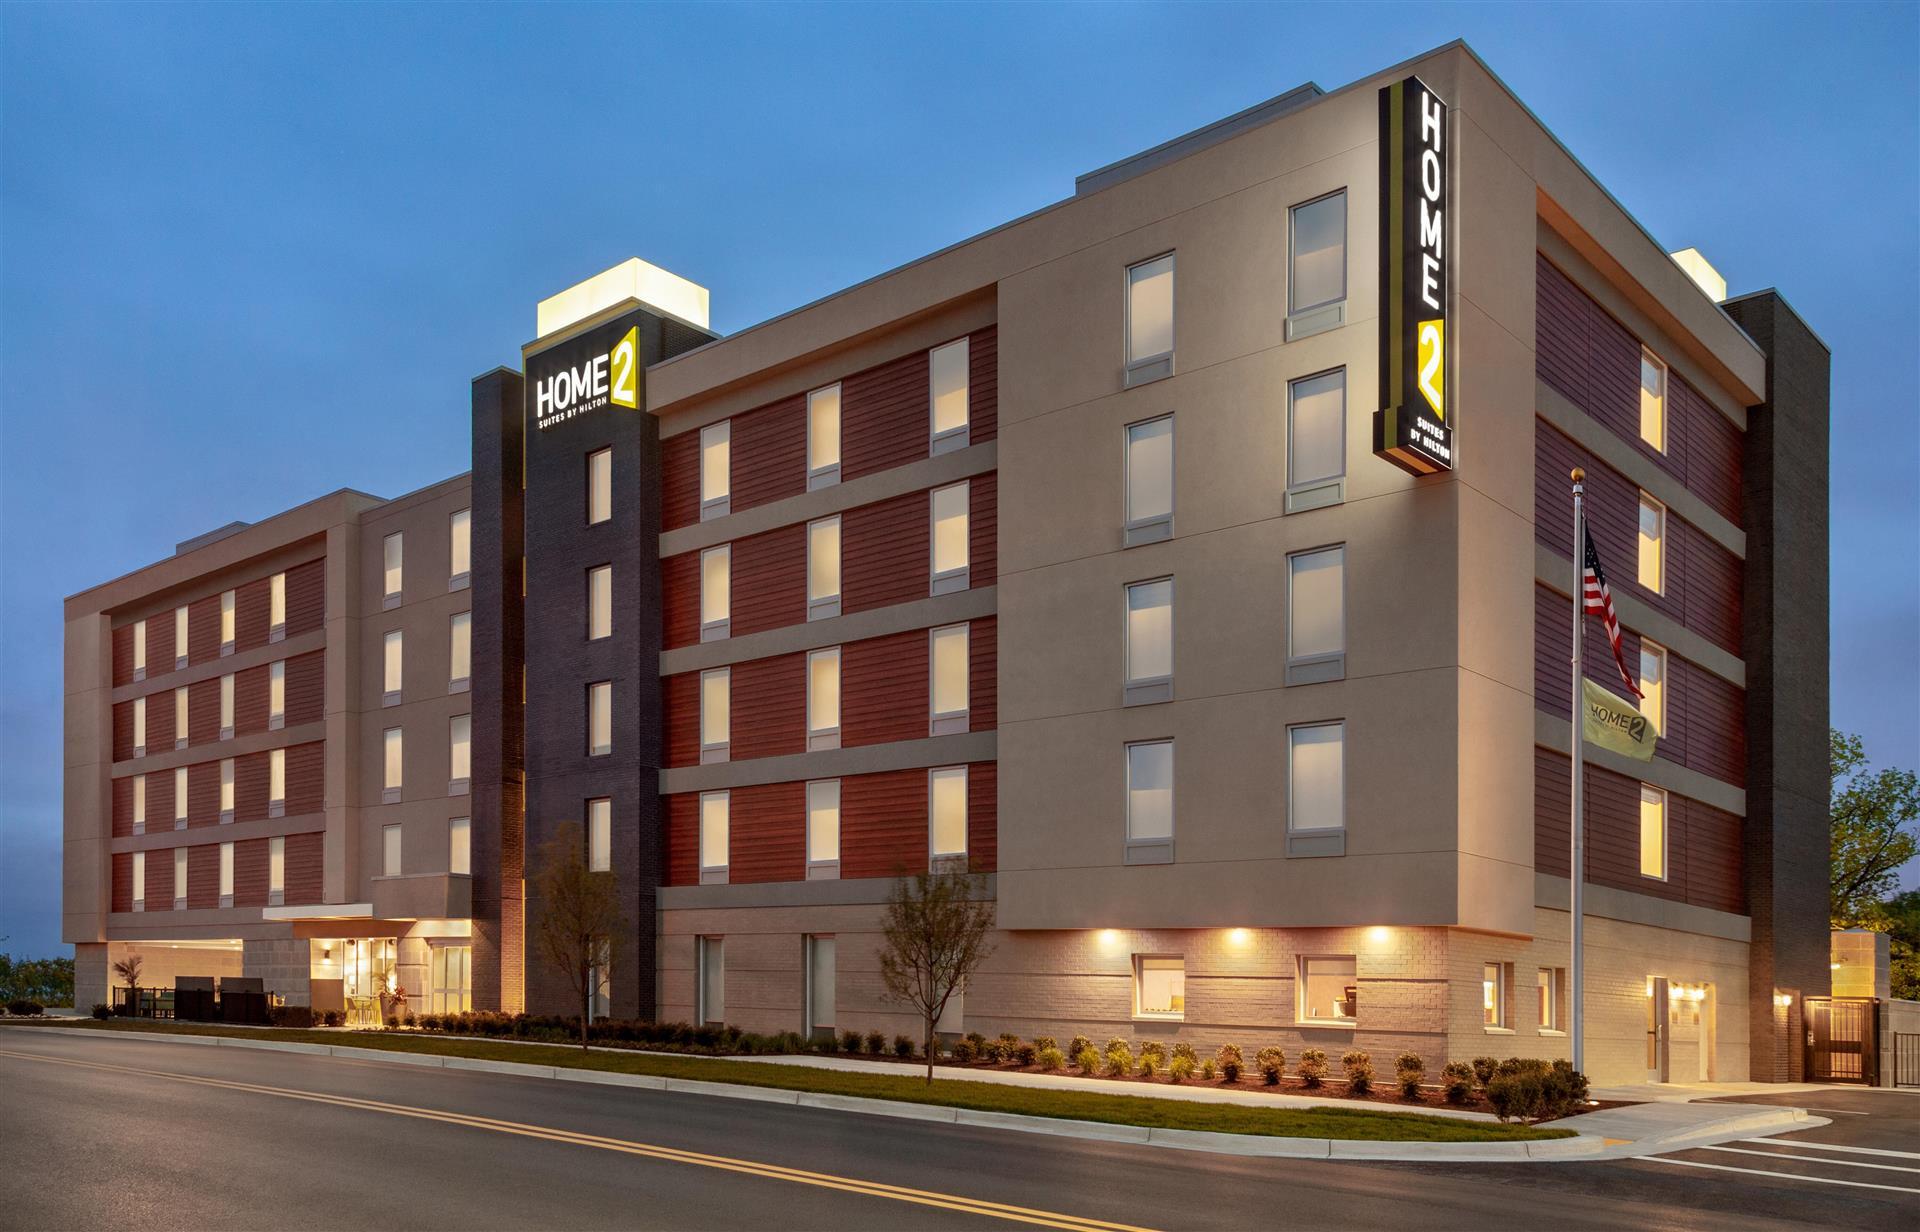 Home2 Suites by Hilton Silver Spring in Silver Spring, MD